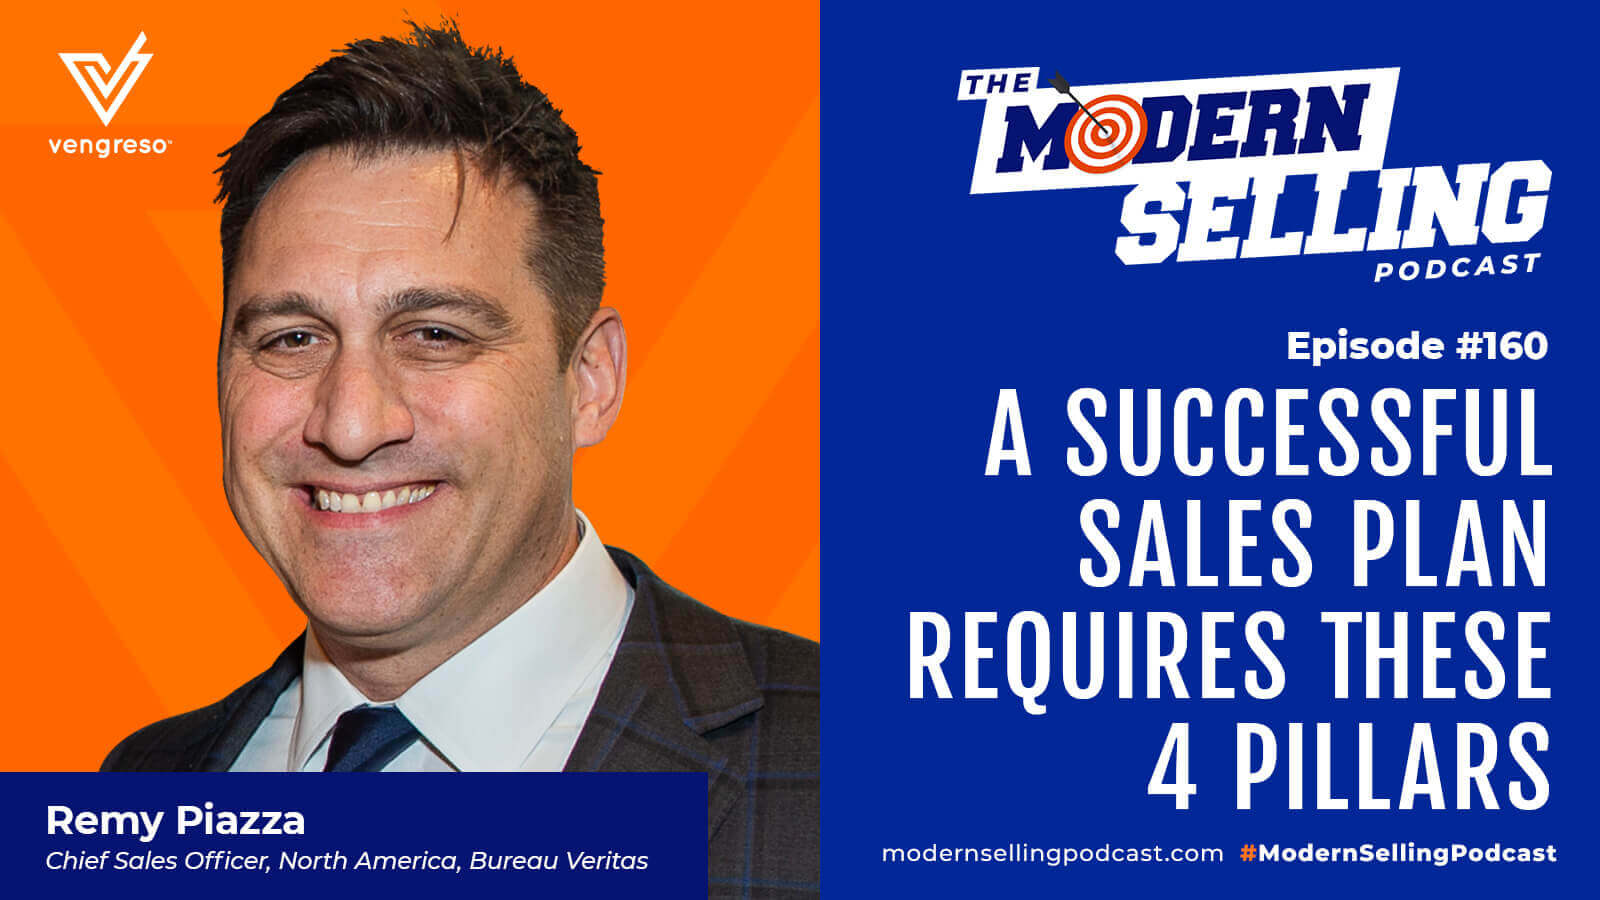 A successful sales plan modern selling podcast episode